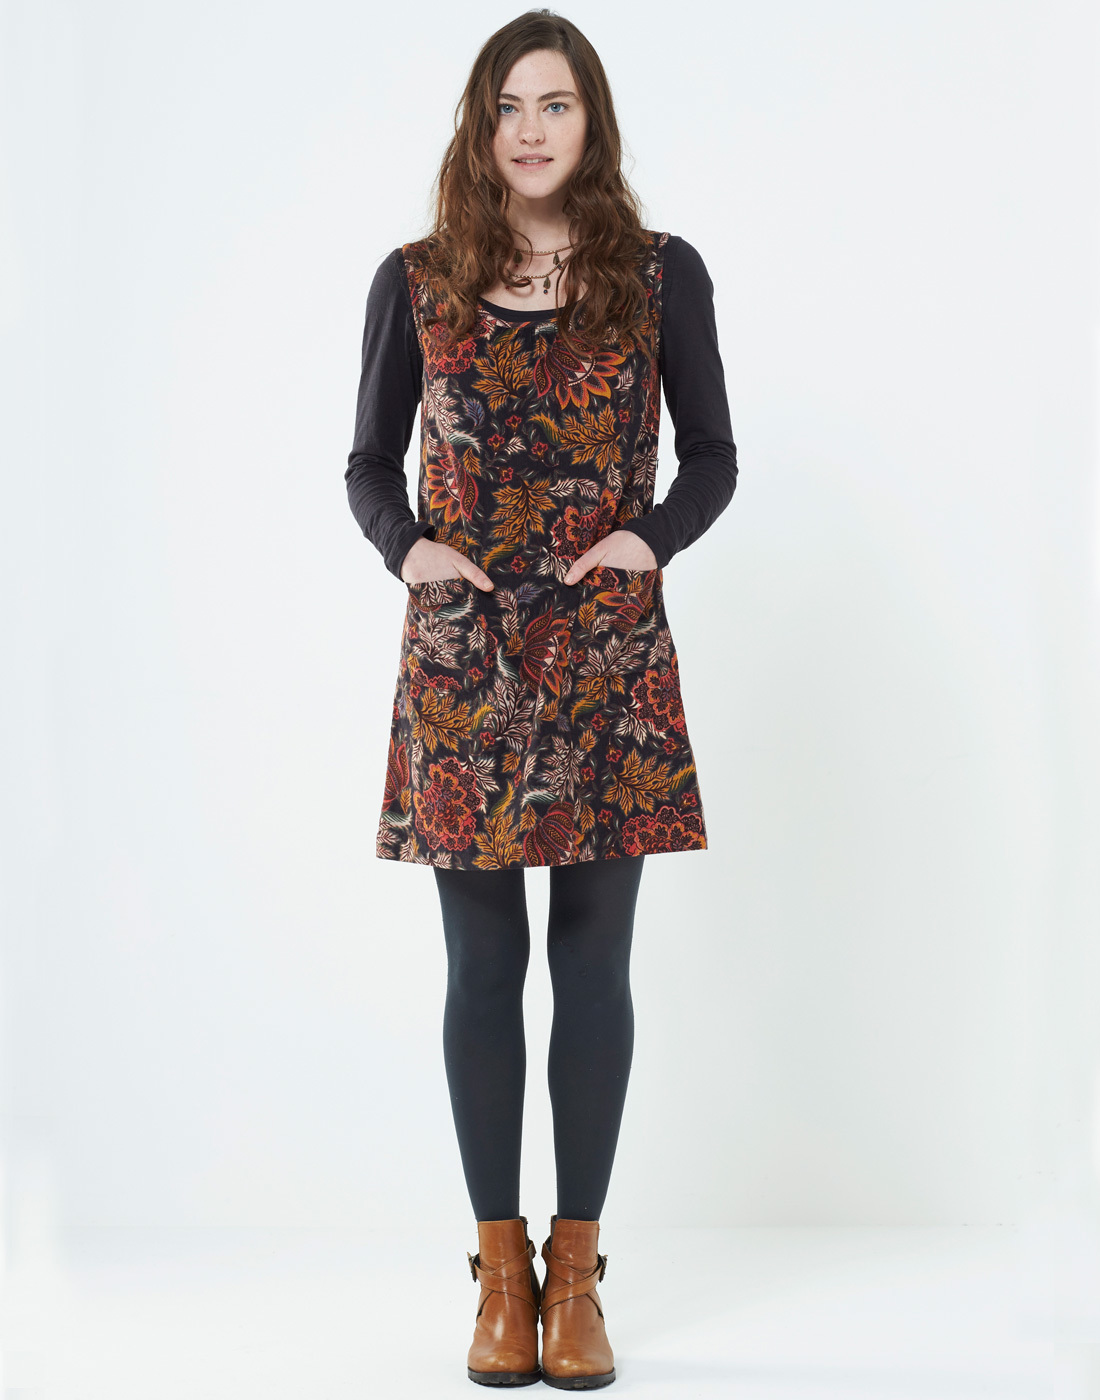 NOMADS Aurora Retro 1960s Mod Floral Cord Pinafore Dress in Rust